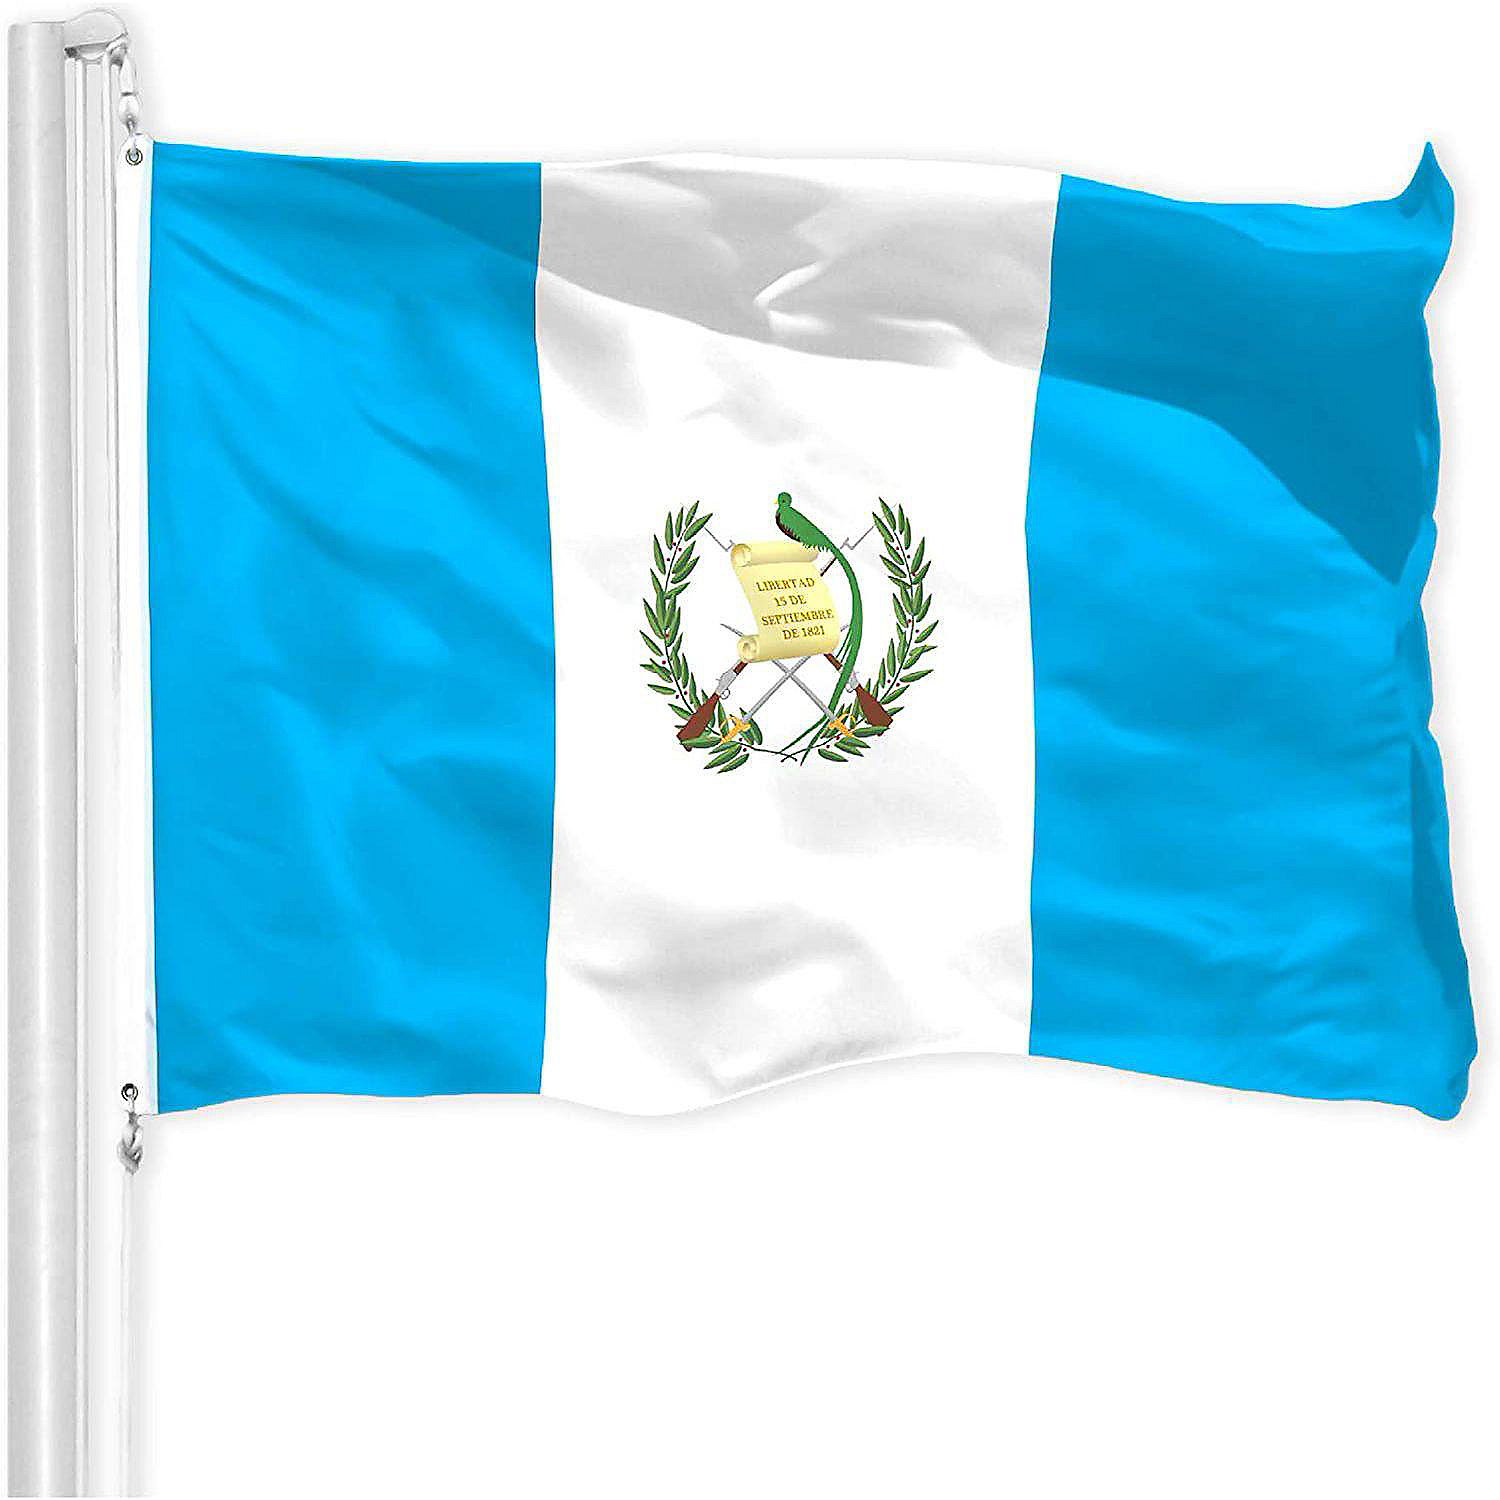 Much Thicker More Durable Than 100D 75D Polyester G128 Guatemala Guatemalan Flag 3x5 FT 150D Printed Brass Grommets Quality Polyester Vibrant Colors Printed 150D – Indoor/Outdoor 3x5 feet